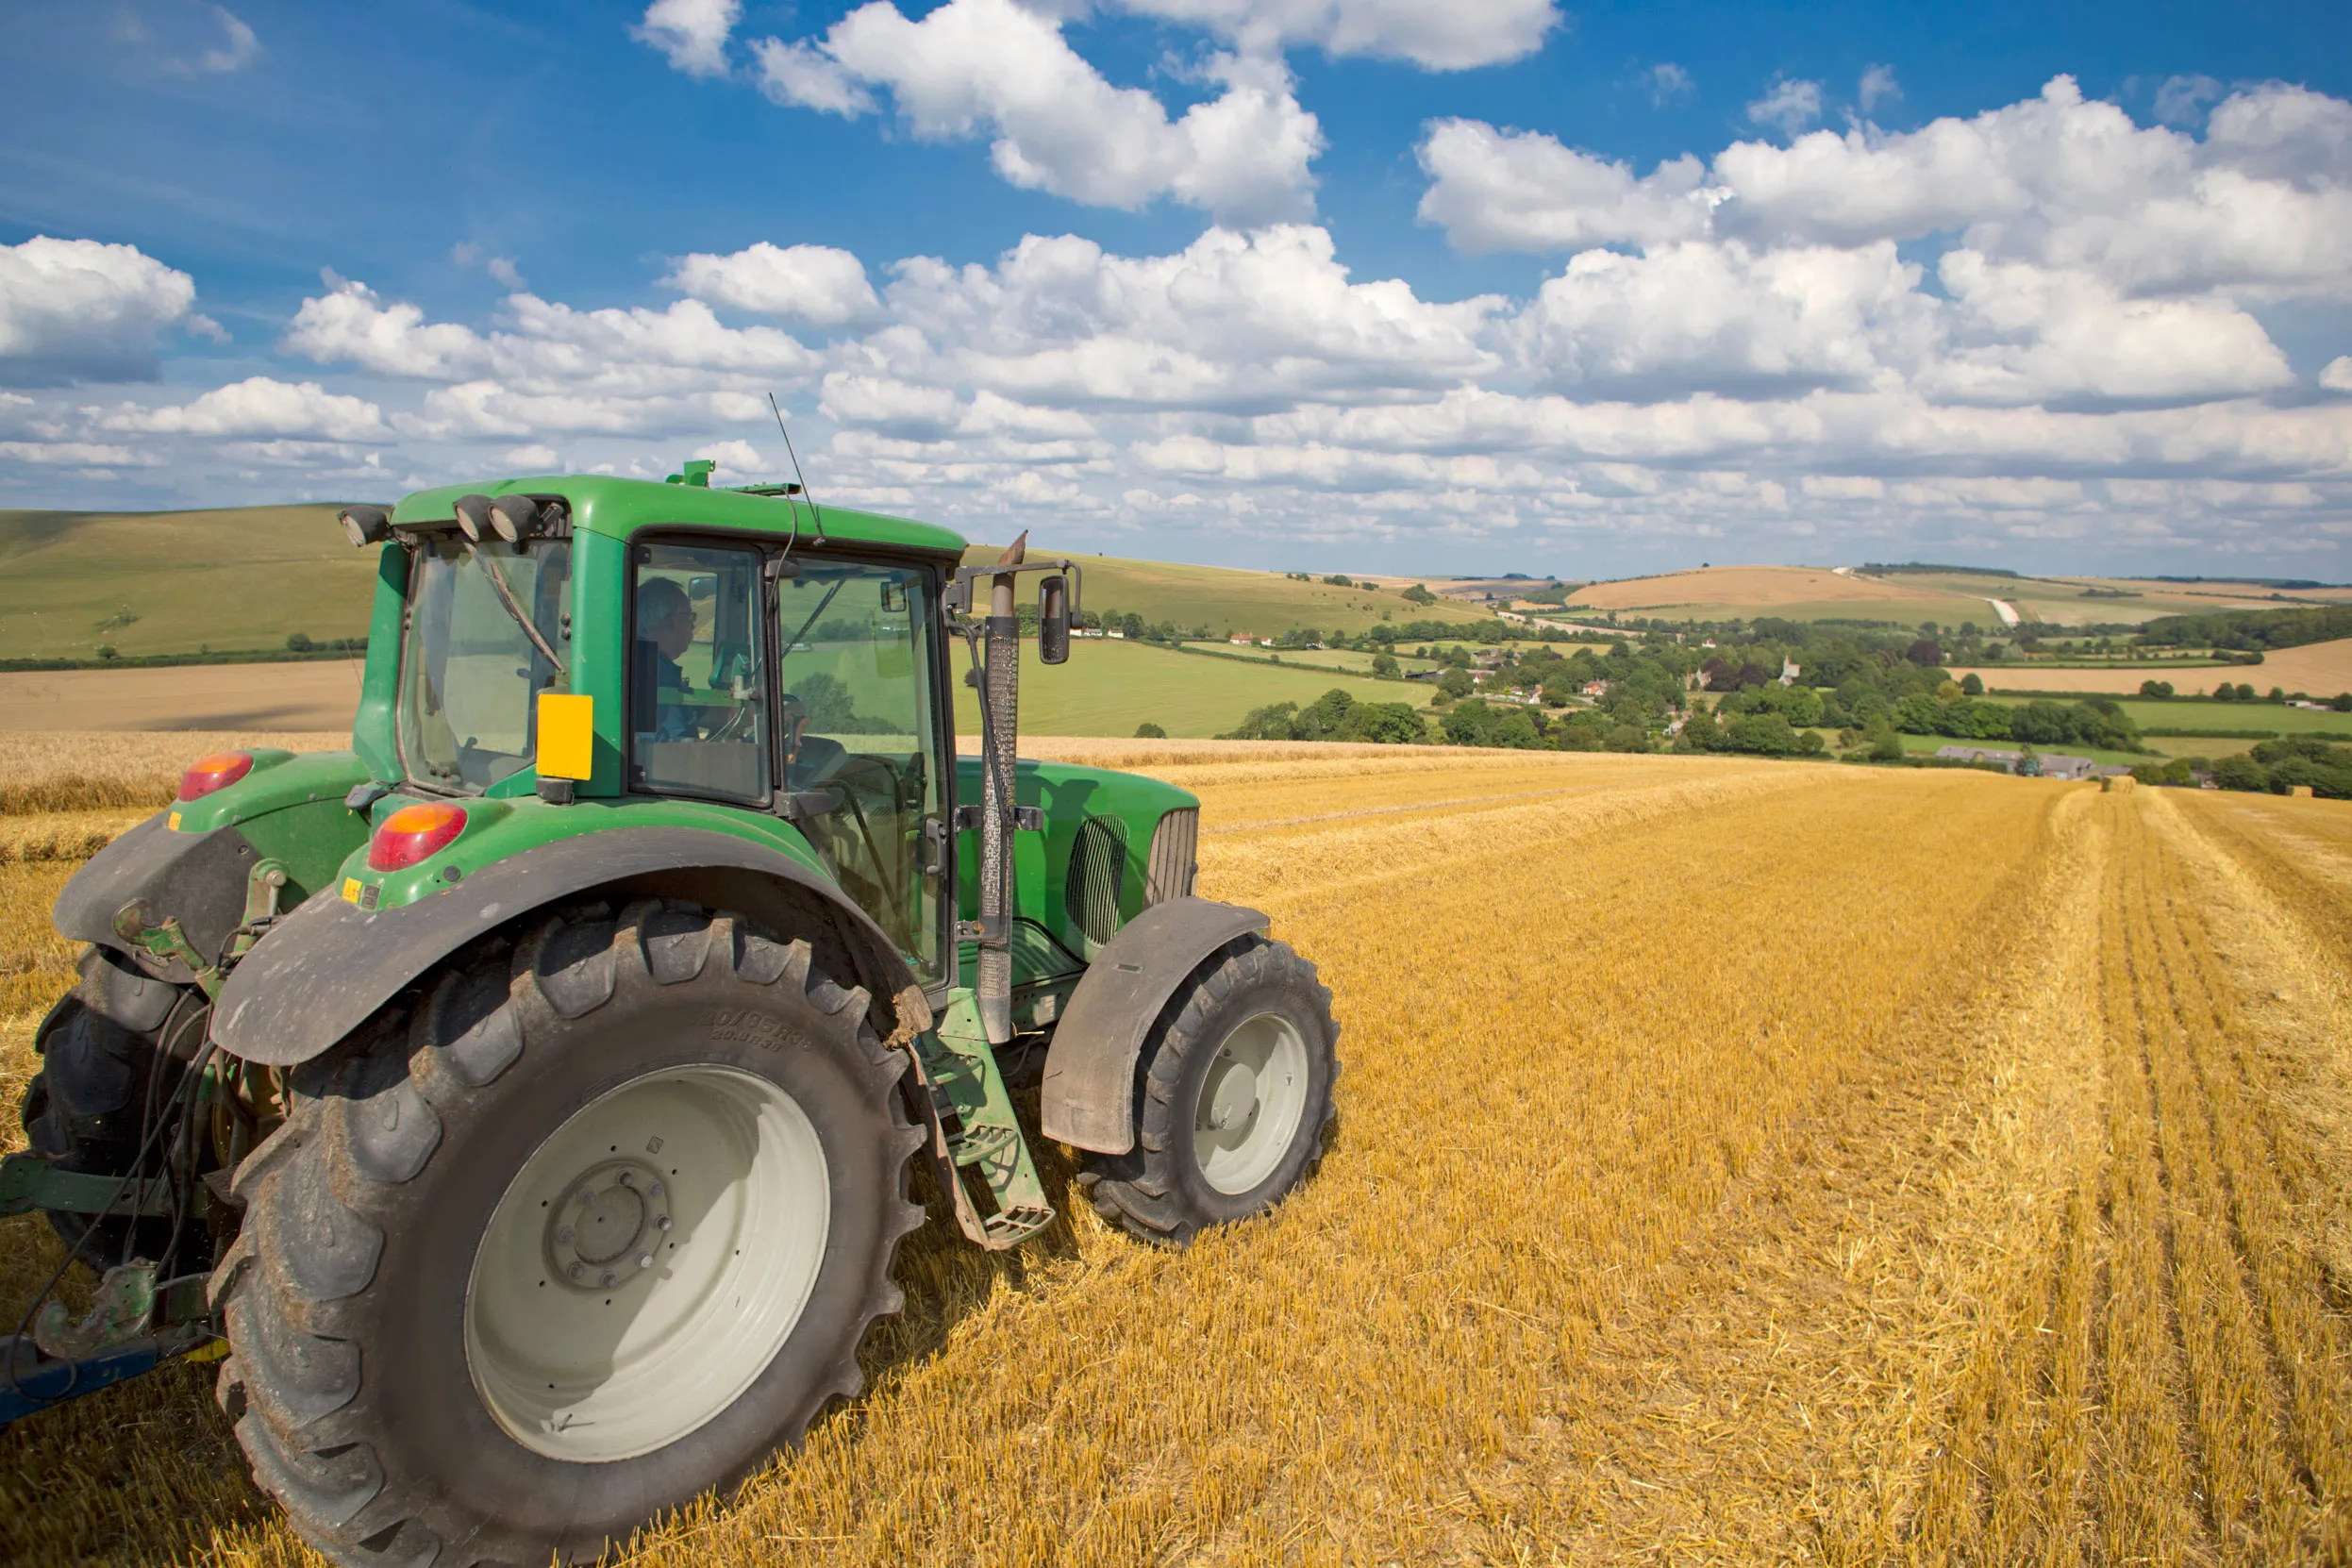 A tractor harvesting a field of golden crops.